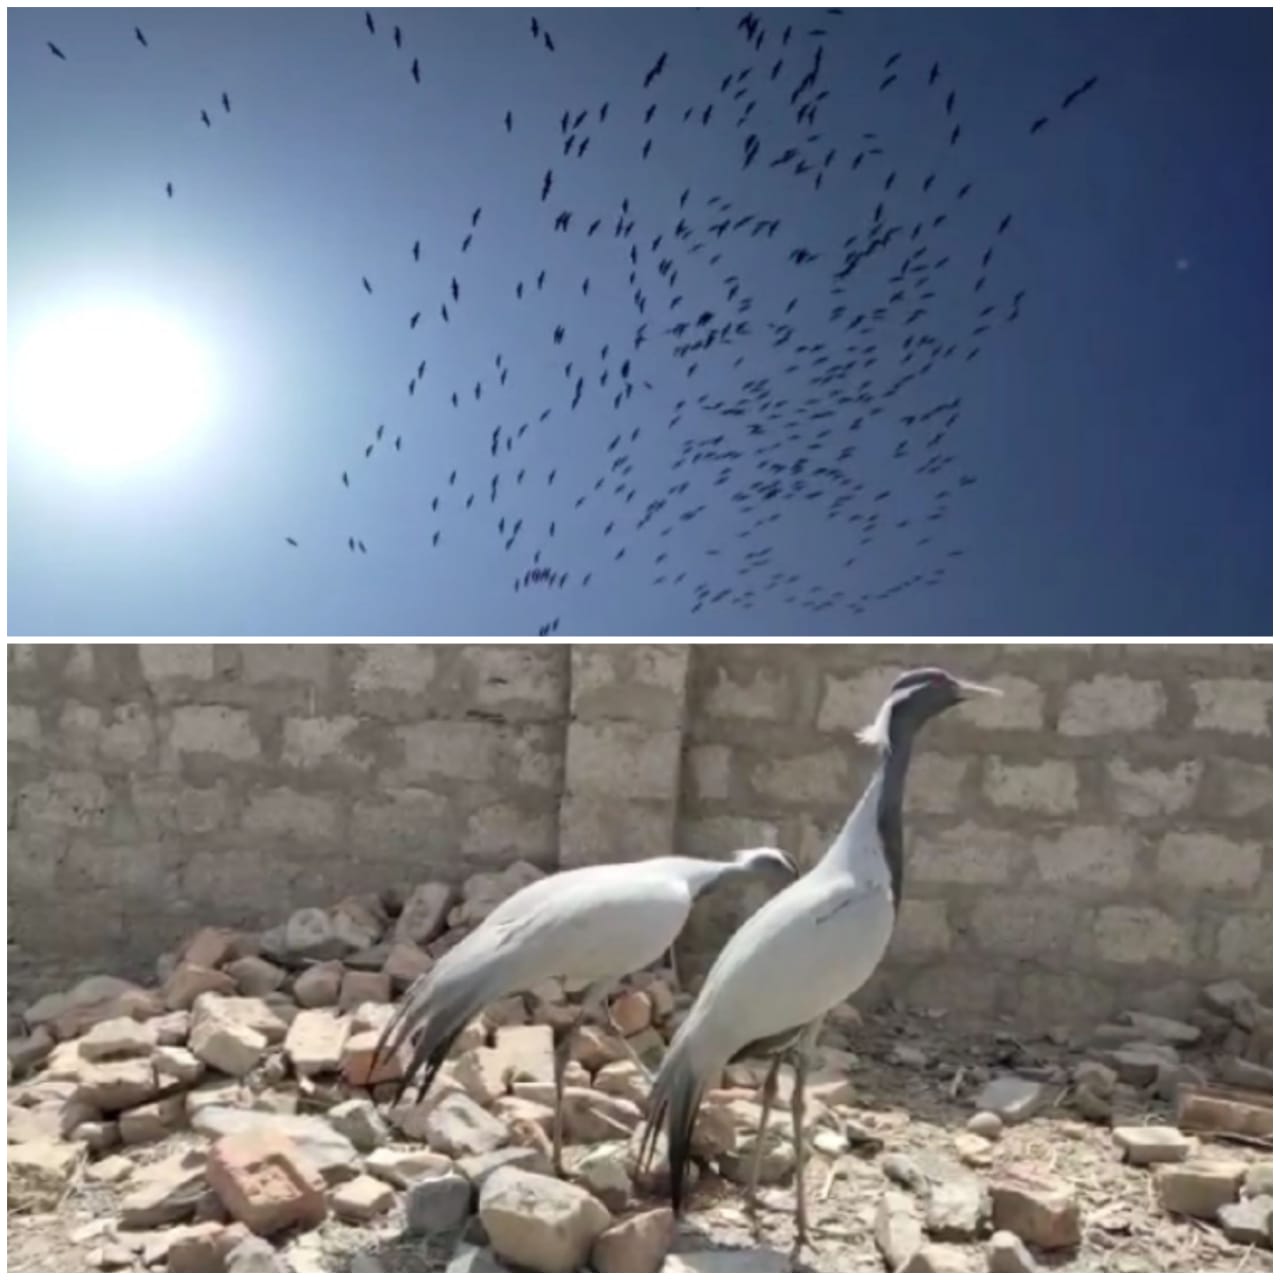 Siberian cranes disappearing from the sky